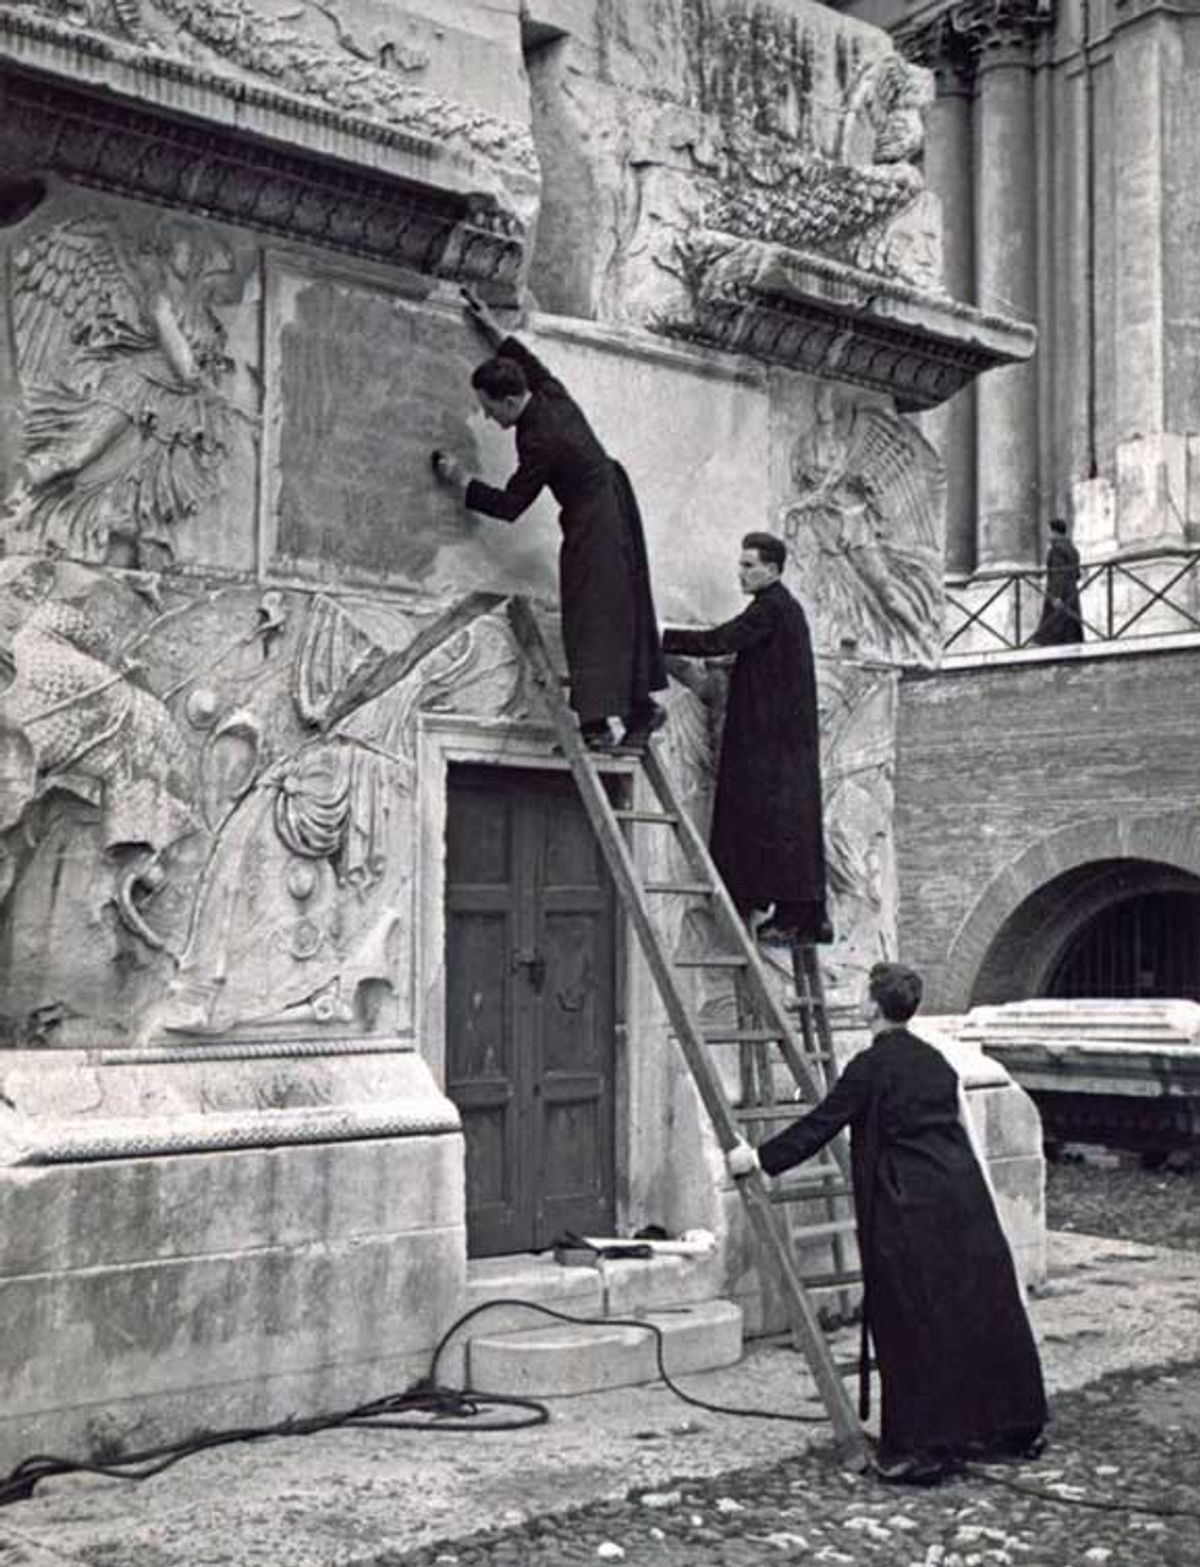 “Superb lettering”: Father Edward Catich taking a rubbing of the inscription on Trajan’s Column, Rome, around 1950

Courtesy St Ambrose University Archives, Davenport